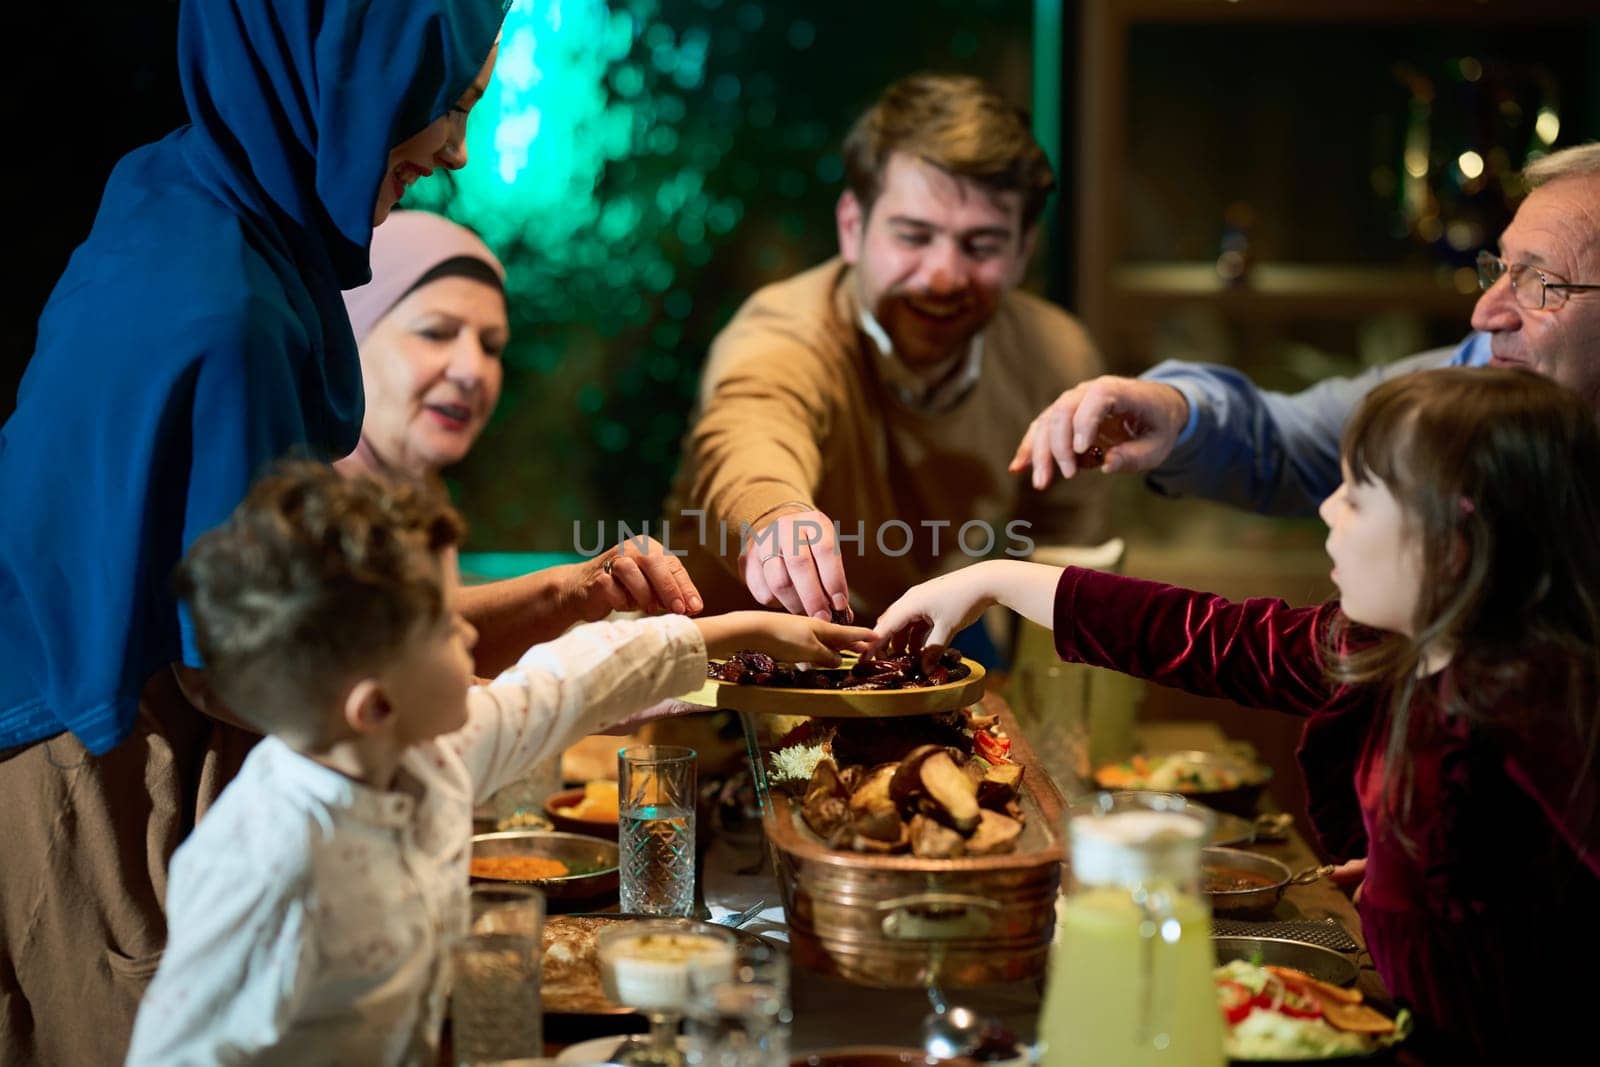 In this modern portrayal, a European Islamic family partakes in the tradition of breaking their Ramadan fast with dates, symbolizing unity, cultural heritage, and spiritual observance during the holy month of Ramadan by dotshock